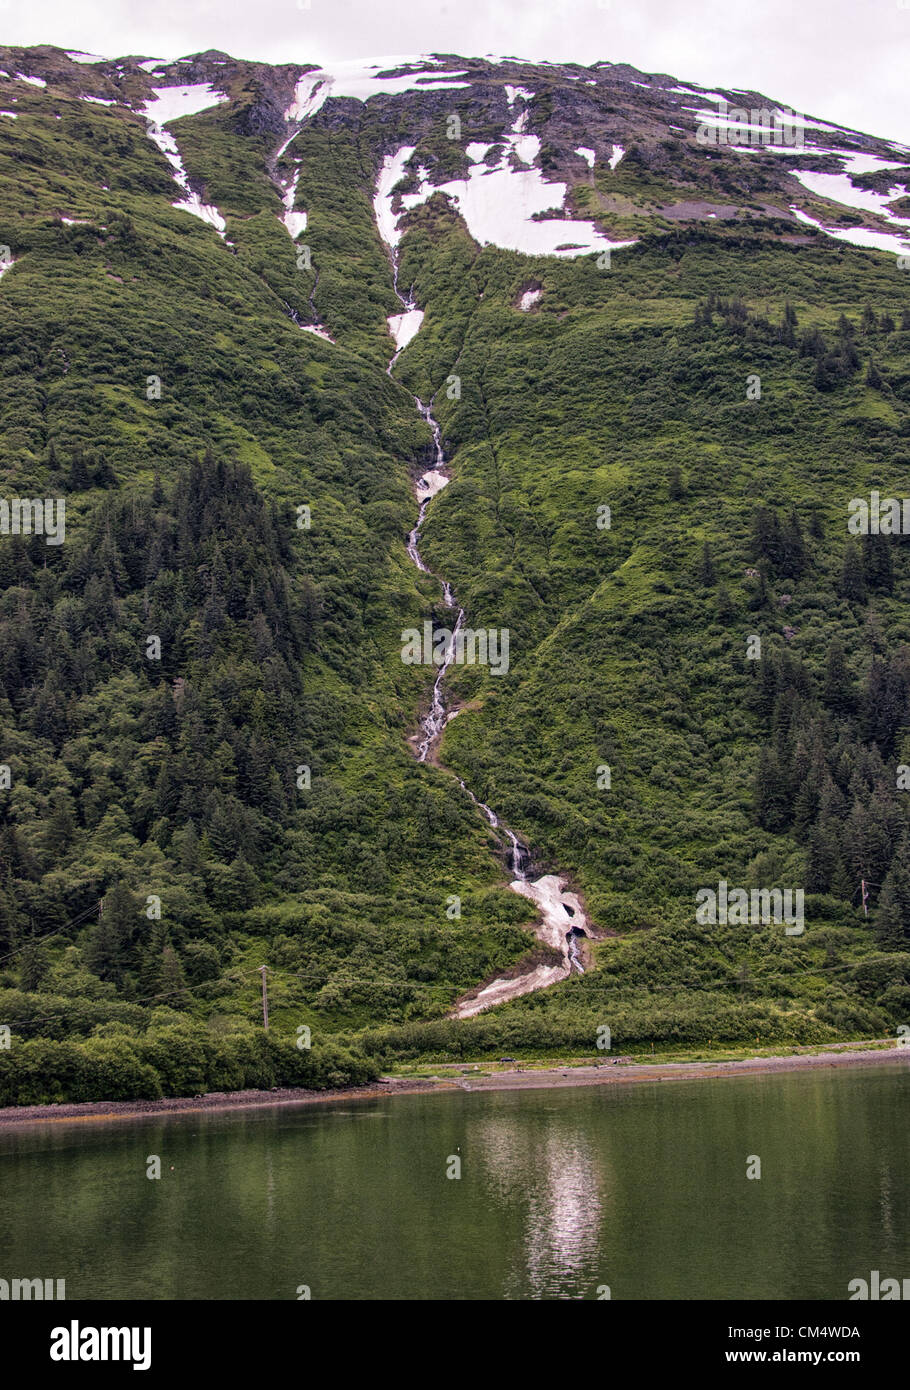 July 5, 2012 - Borough Of Juneau, Alaska, US - A stream fed by melting snow from one of the mountains in the Tongass National Forest flows into Gastineau Channel near Juneau. (Credit Image: © Arnold Drapkin/ZUMAPRESS.com) Stock Photo